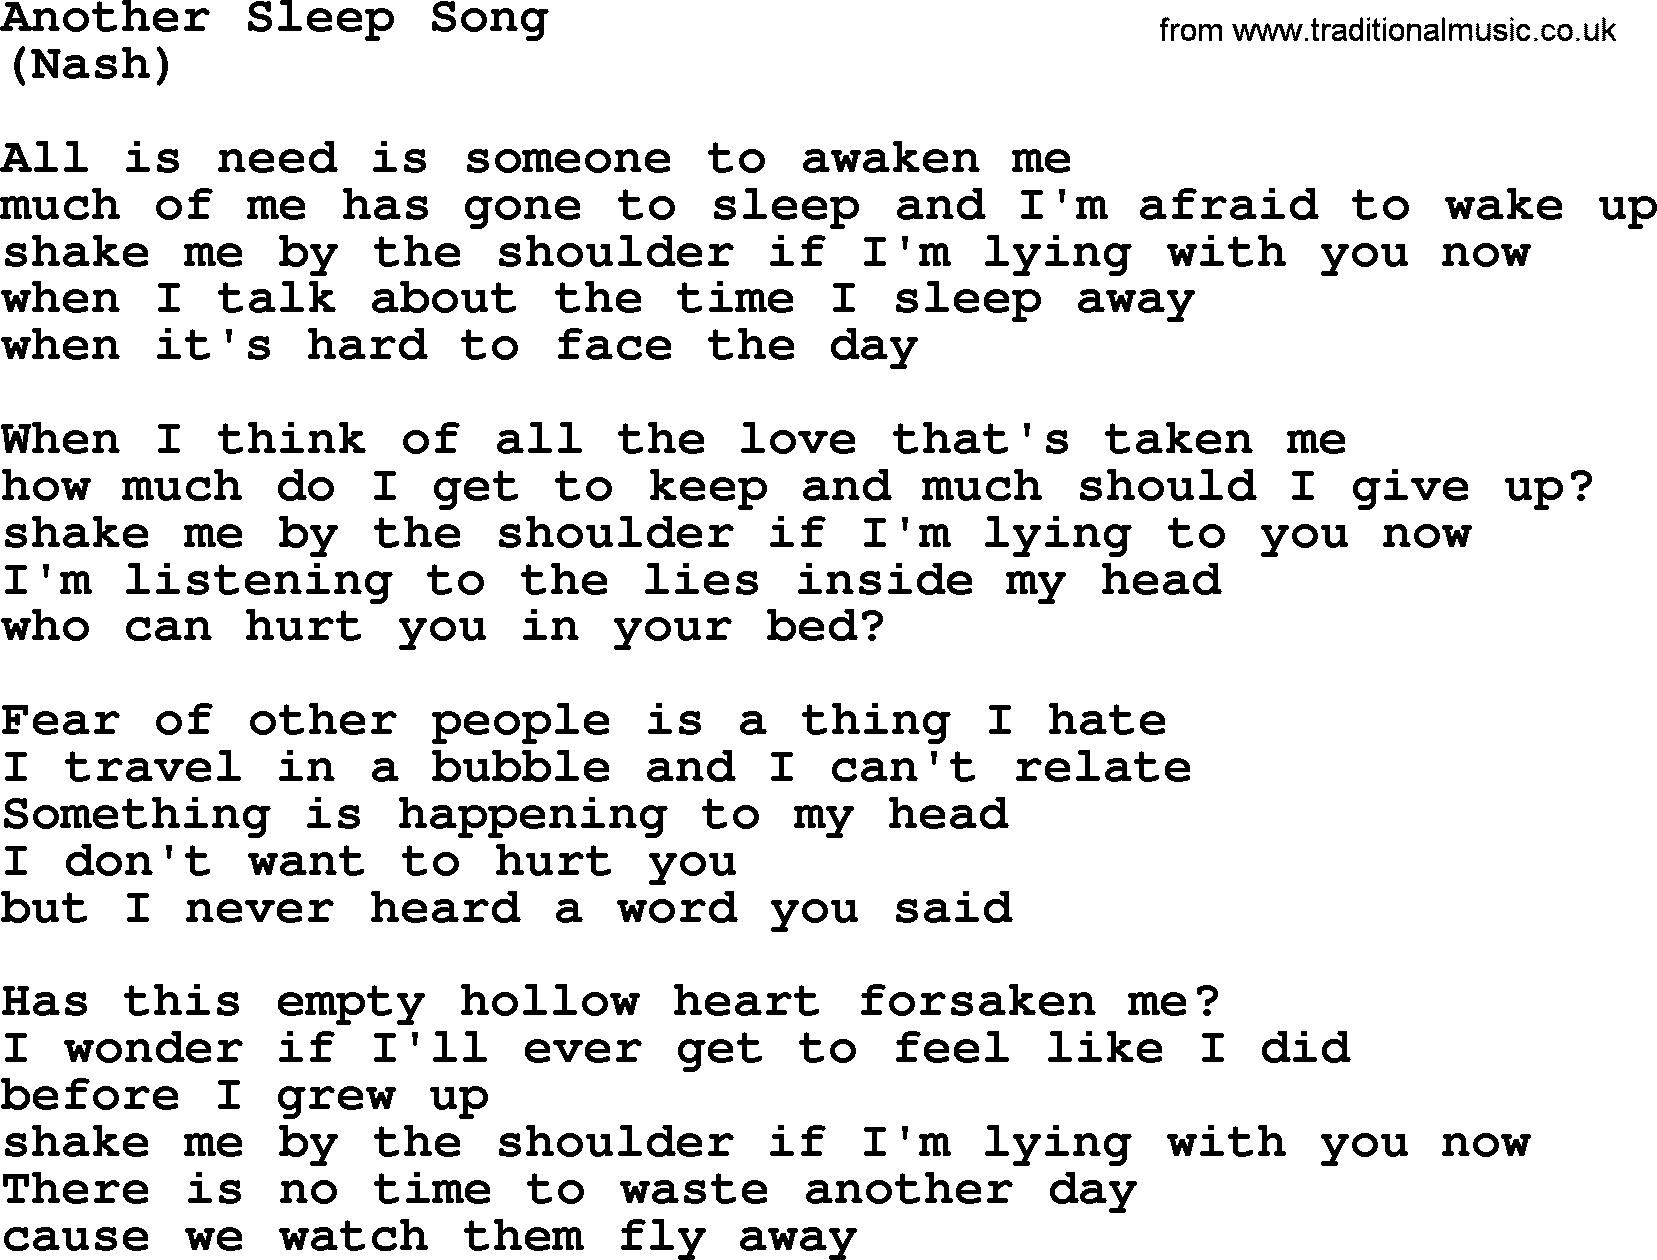 The Byrds song Another Sleep Song, lyrics